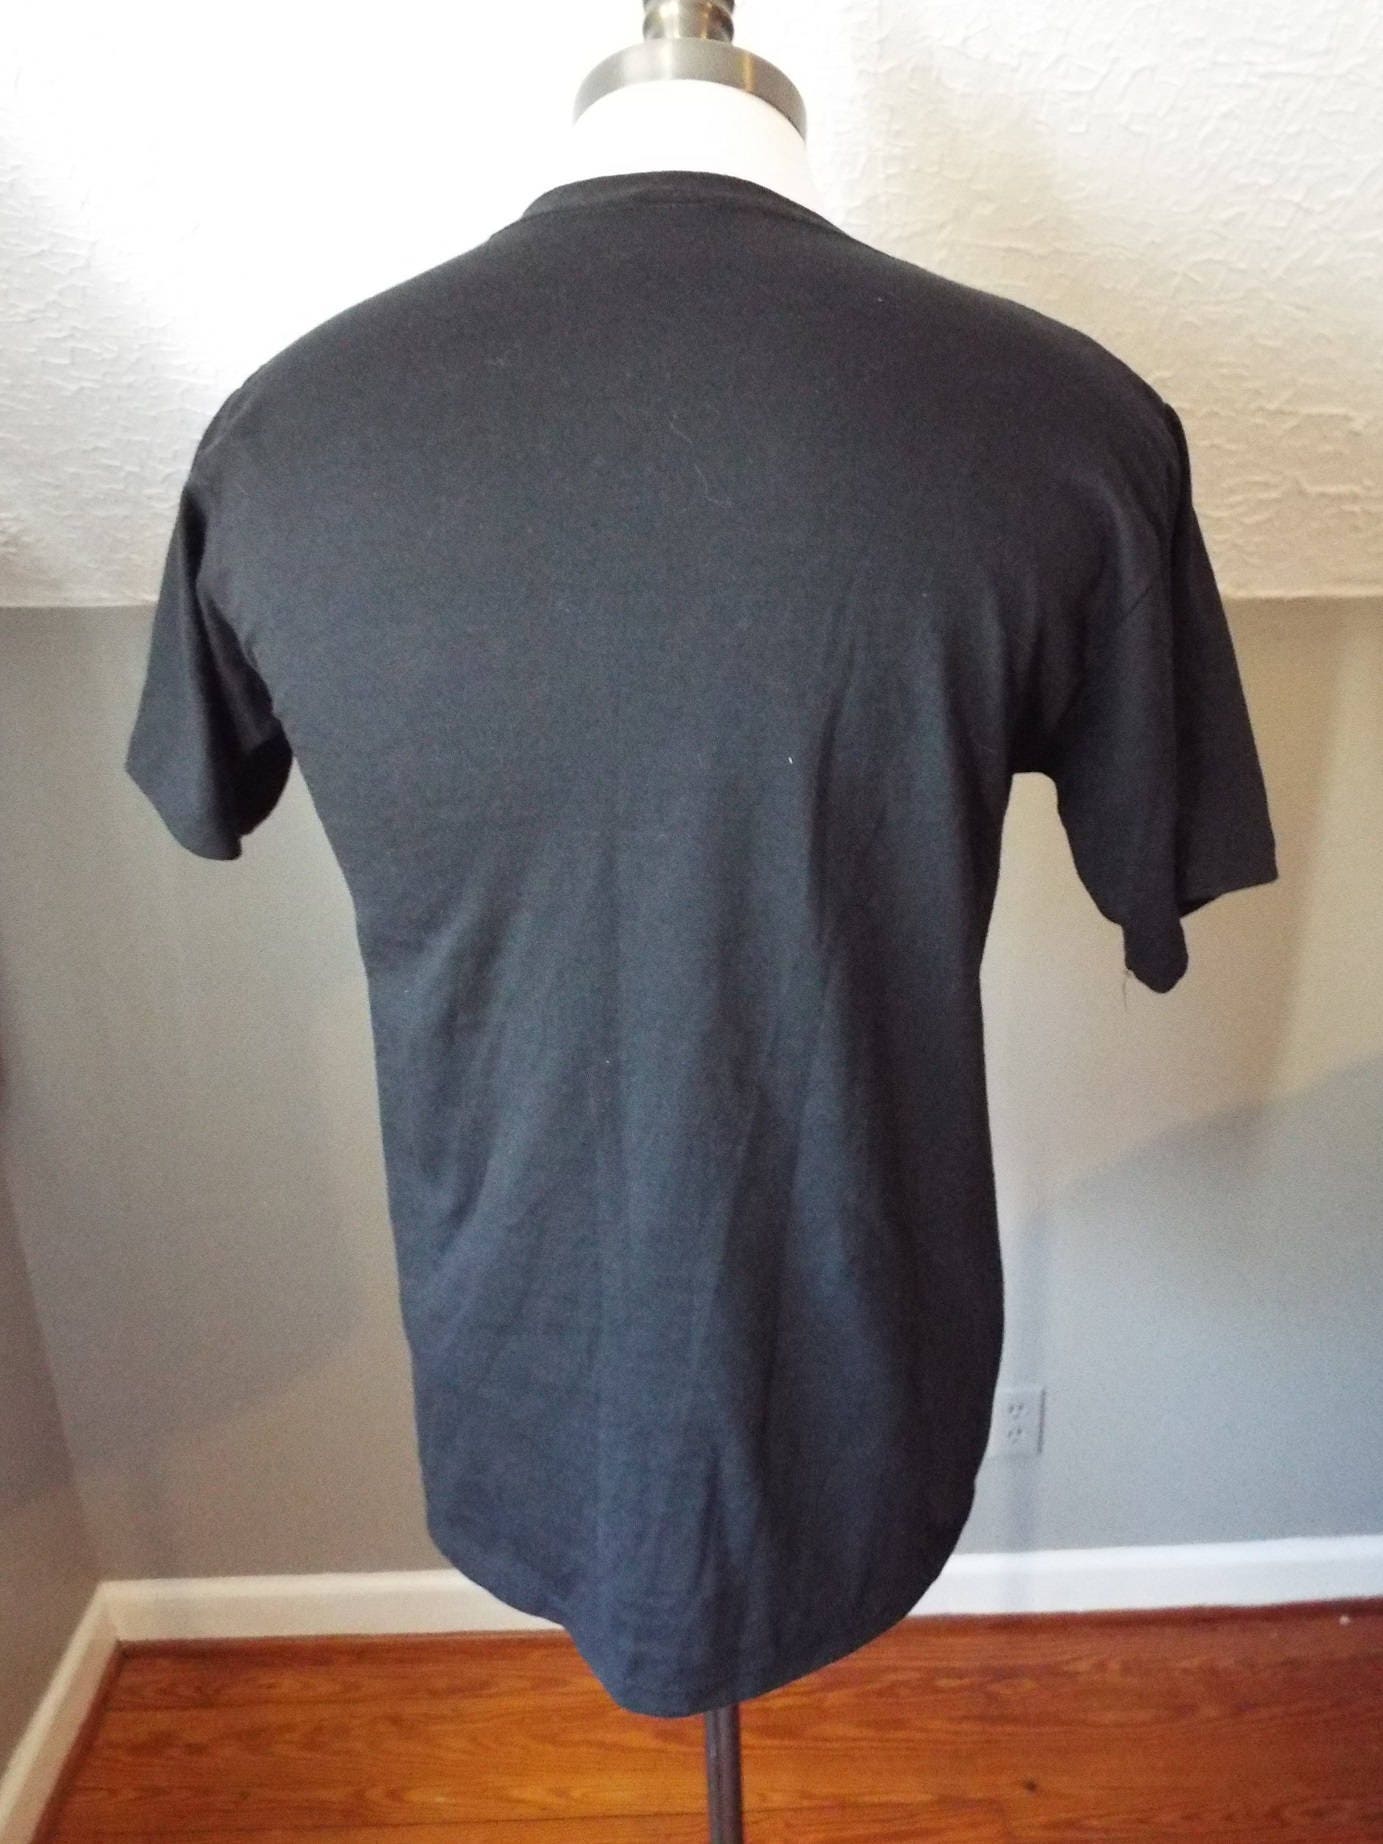 Vintage T-Shirt with Iron-On by Devknit